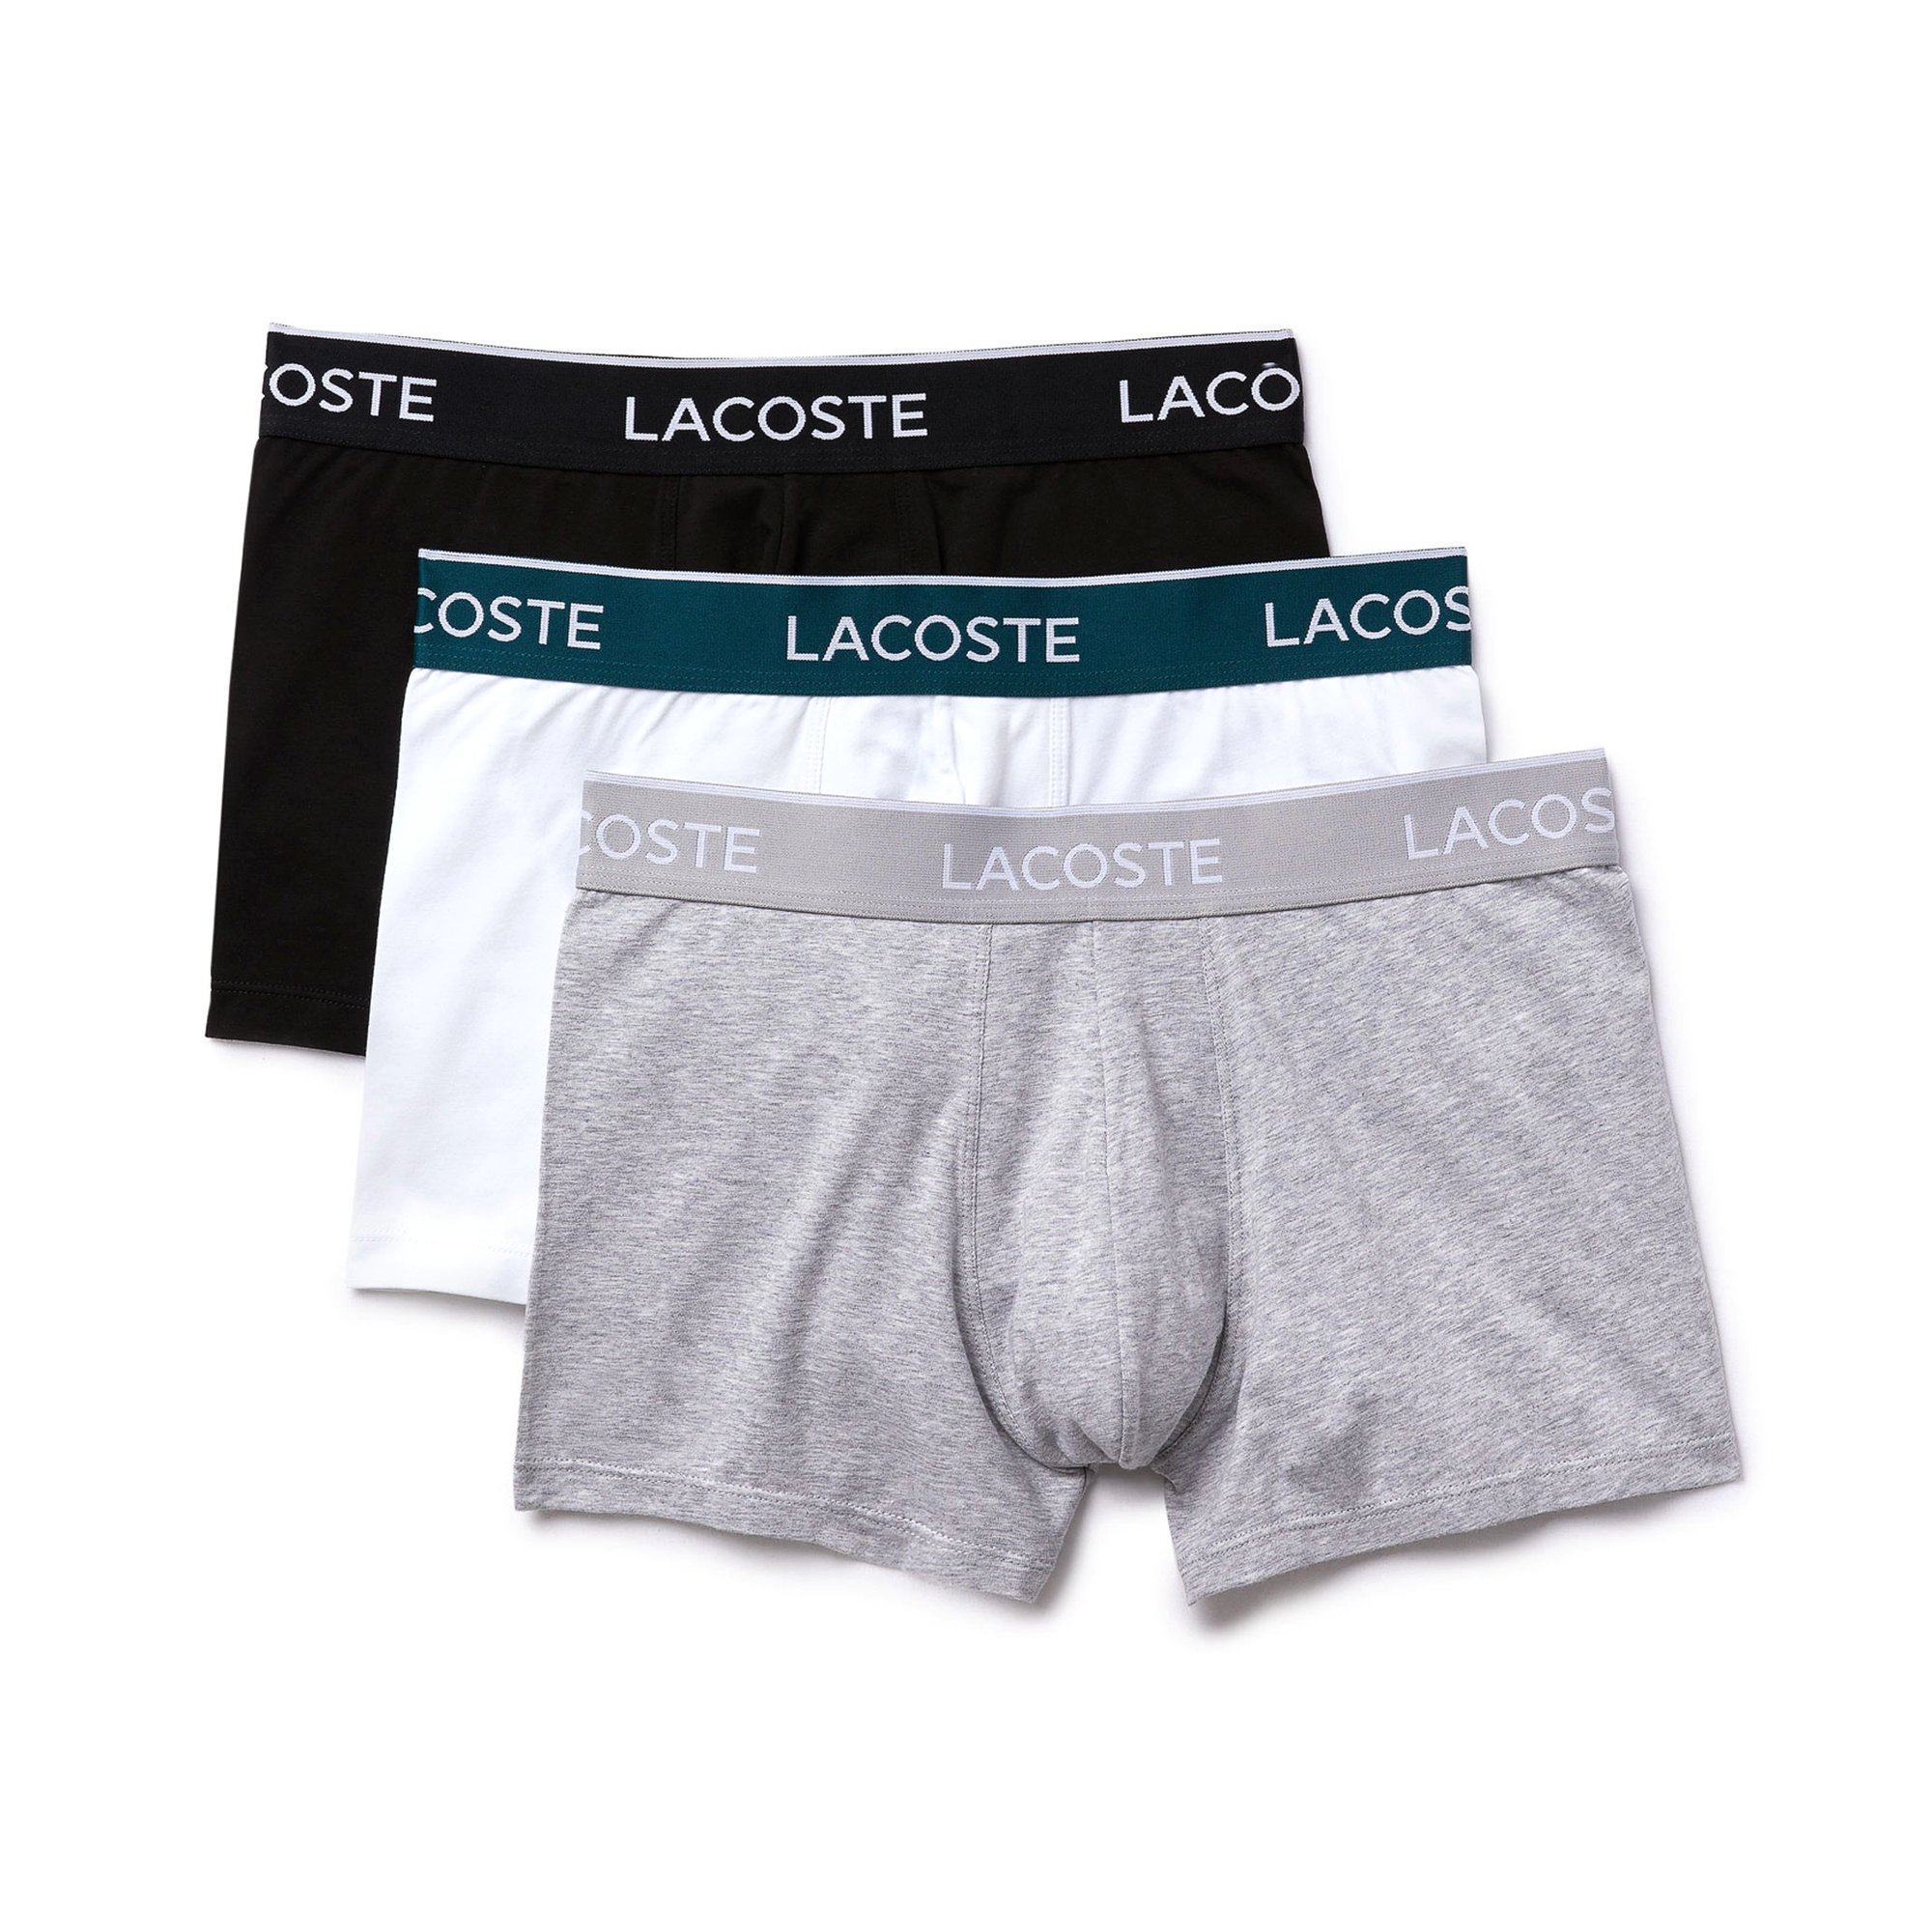 Lacoste Cotton Stretch Trunk 3-Pack